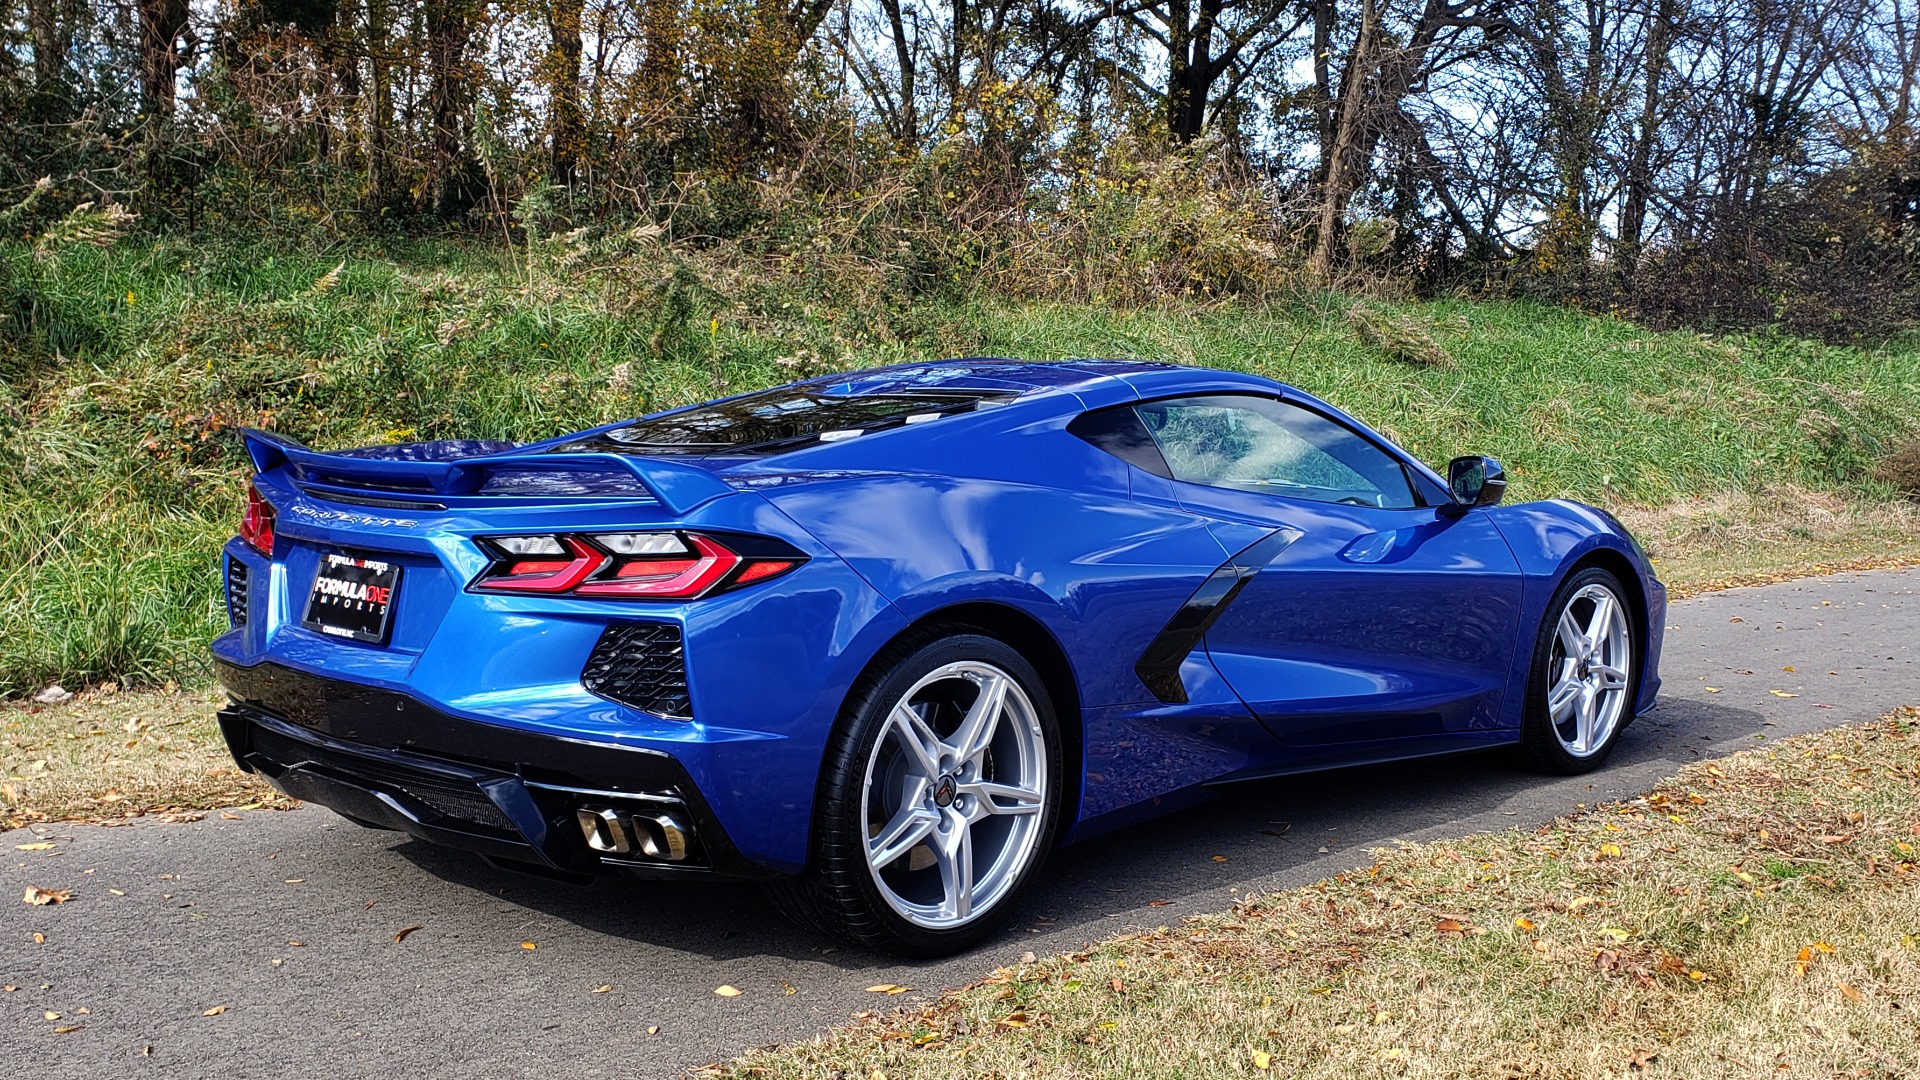 Used 2020 Chevrolet C8 CORVETTE STINGRAY 2LT COUPE / NAV / HUD / BOSE / GT2 SEATS / FRONT LIFT / REARVIEW for sale Sold at Formula Imports in Charlotte NC 28227 14